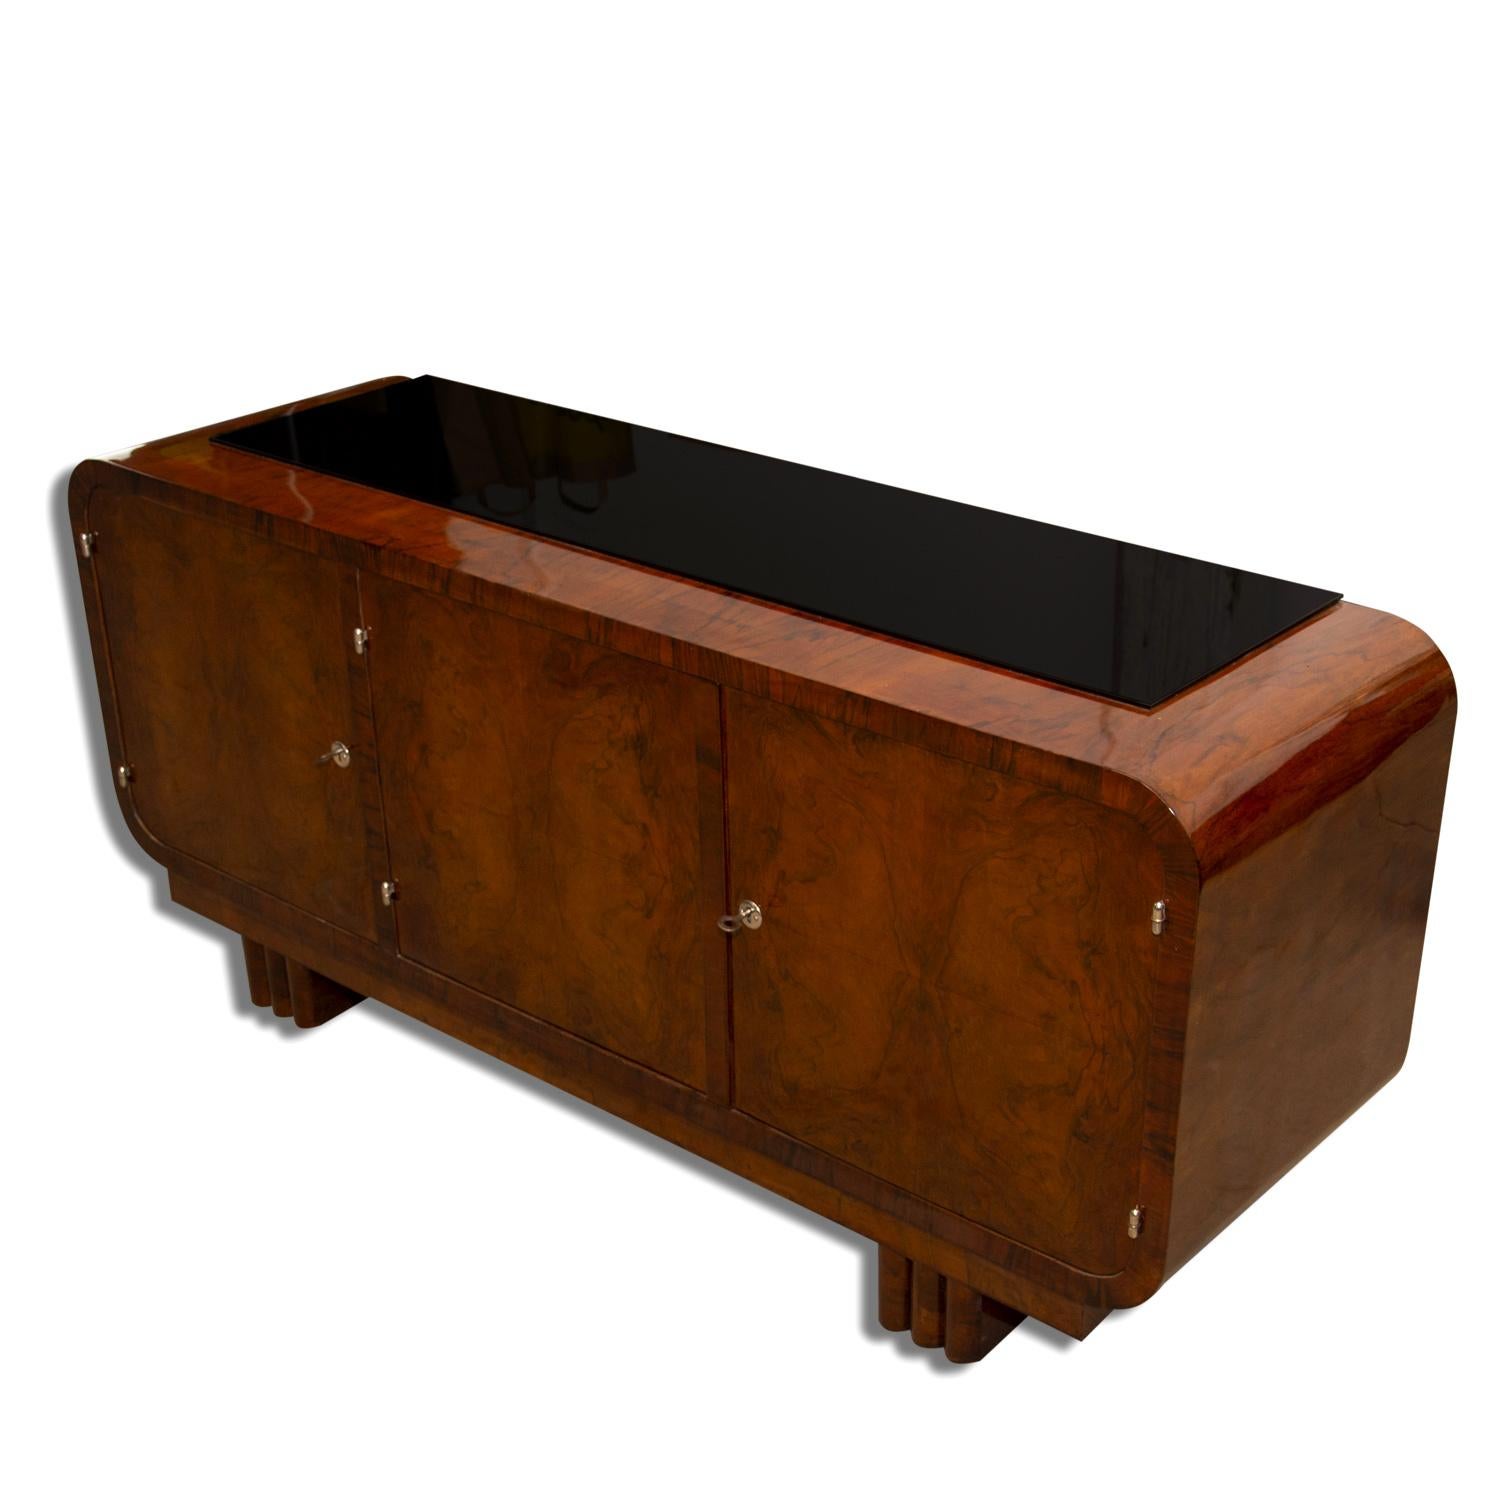 This sideboard or commode from the 1930s was made in Bohemia. It´s an example of Central European functionalism and is made of solid wood and veneered in walnut. It features a storage space divided to two parts and the top is covered with black